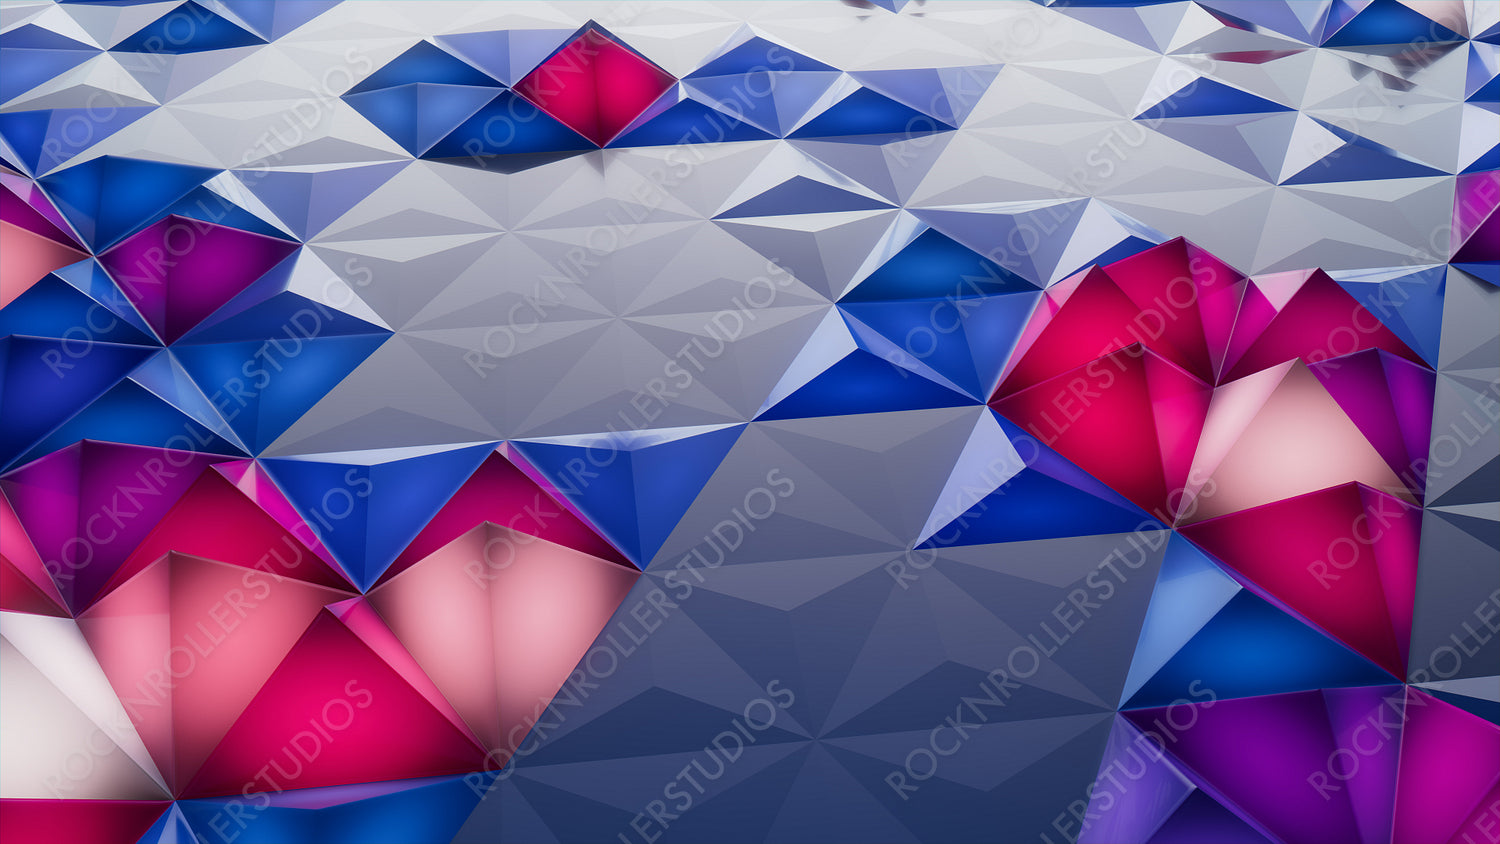 Illuminated, Blue and Pink Polygonal Surface with Tetrahedrons. Modern, Neon 3d Texture.